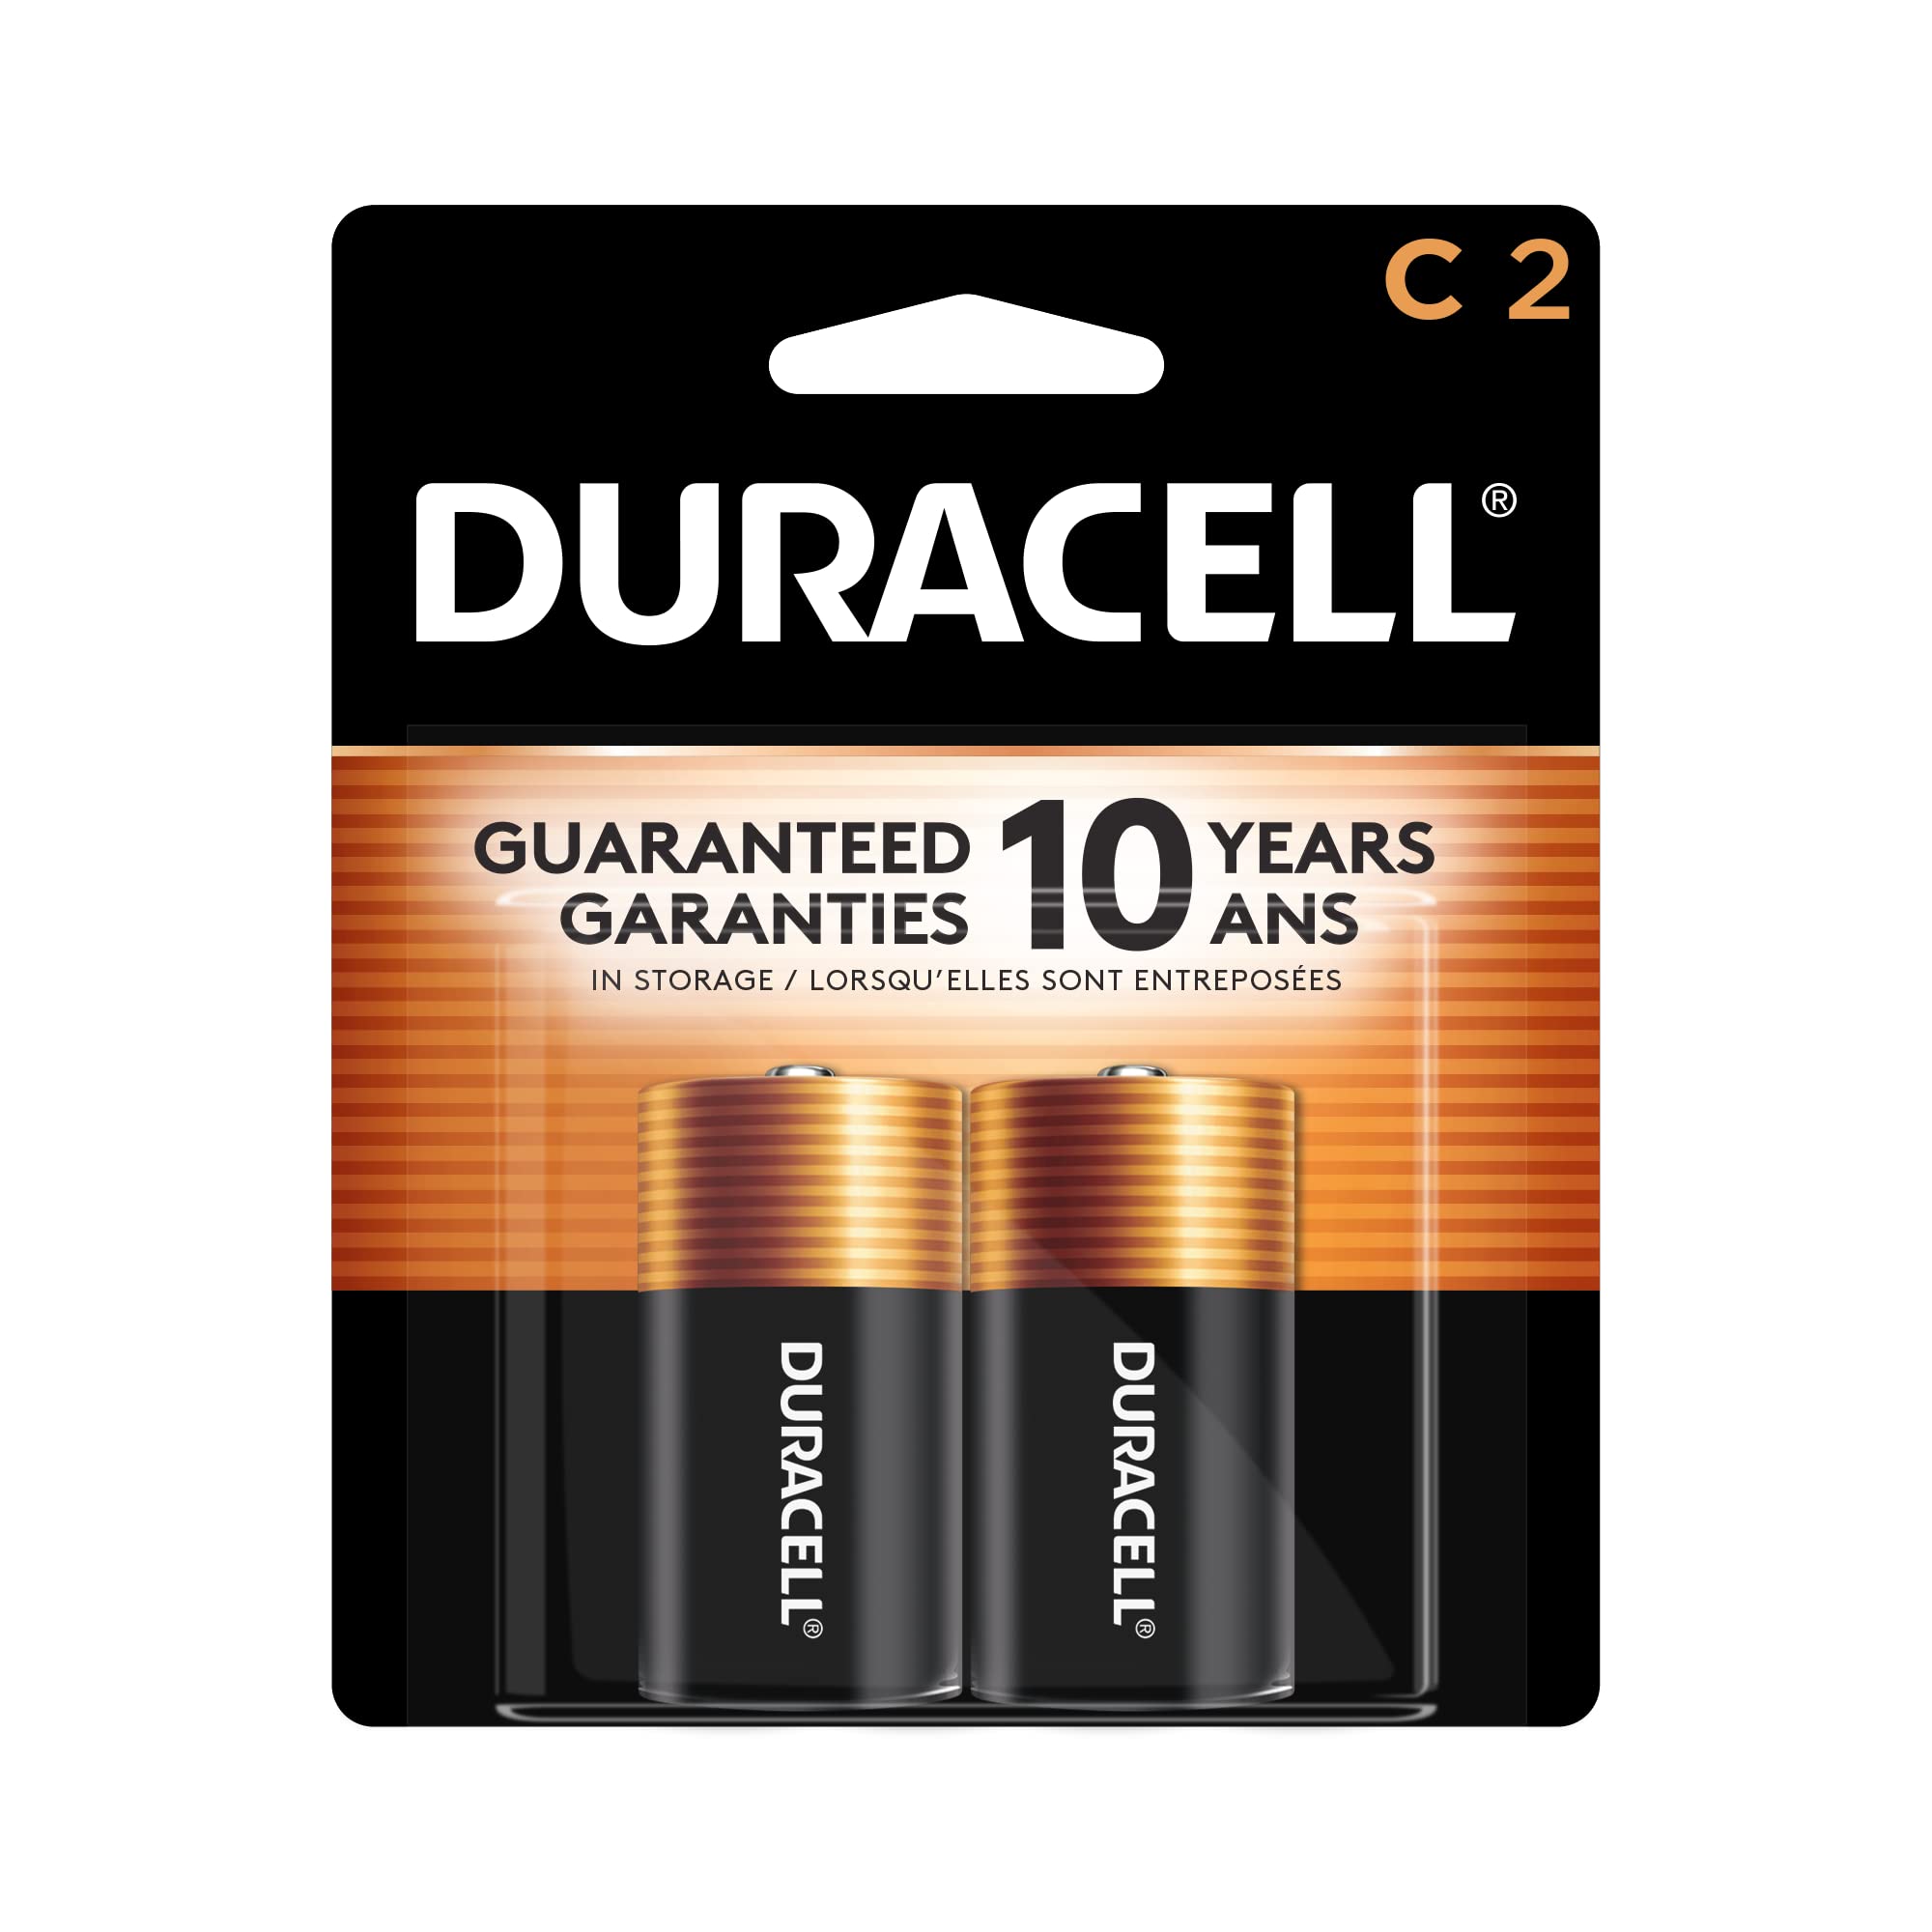 DURACELL Coppertop 1.5V Size C Alkaline Battery, (Pack of 32) - image 1 of 5